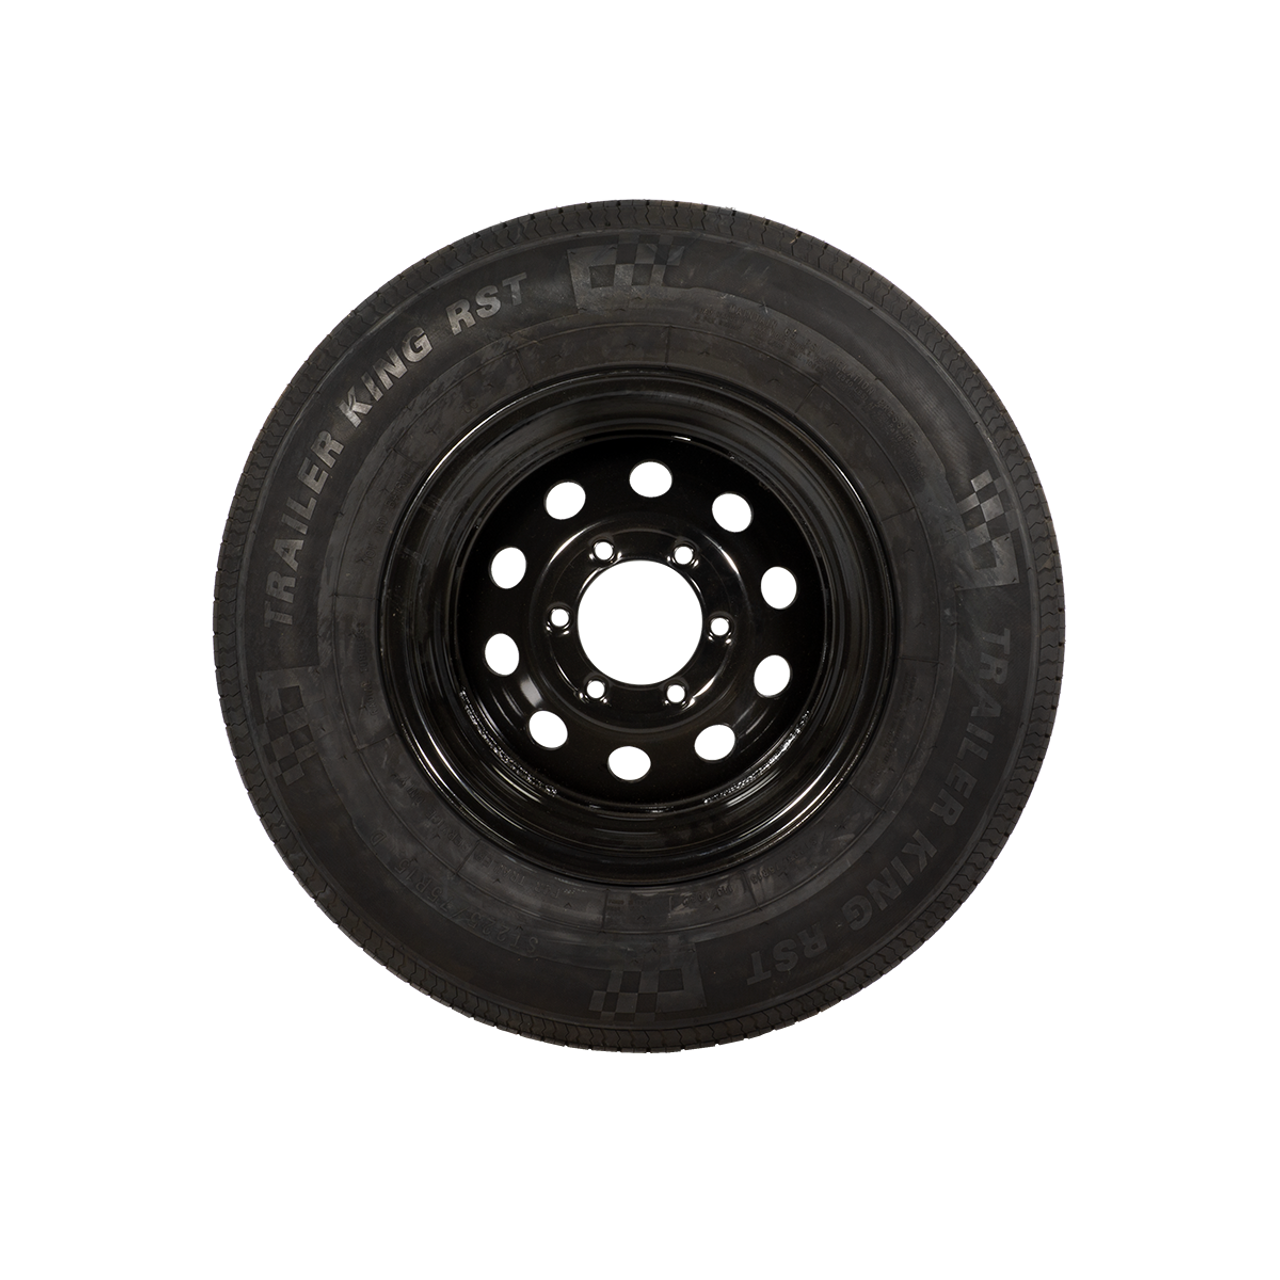 WT15-655BMR --- 15" Trailer Wheel and Tire Assembly, 6 on 5.5" - Black